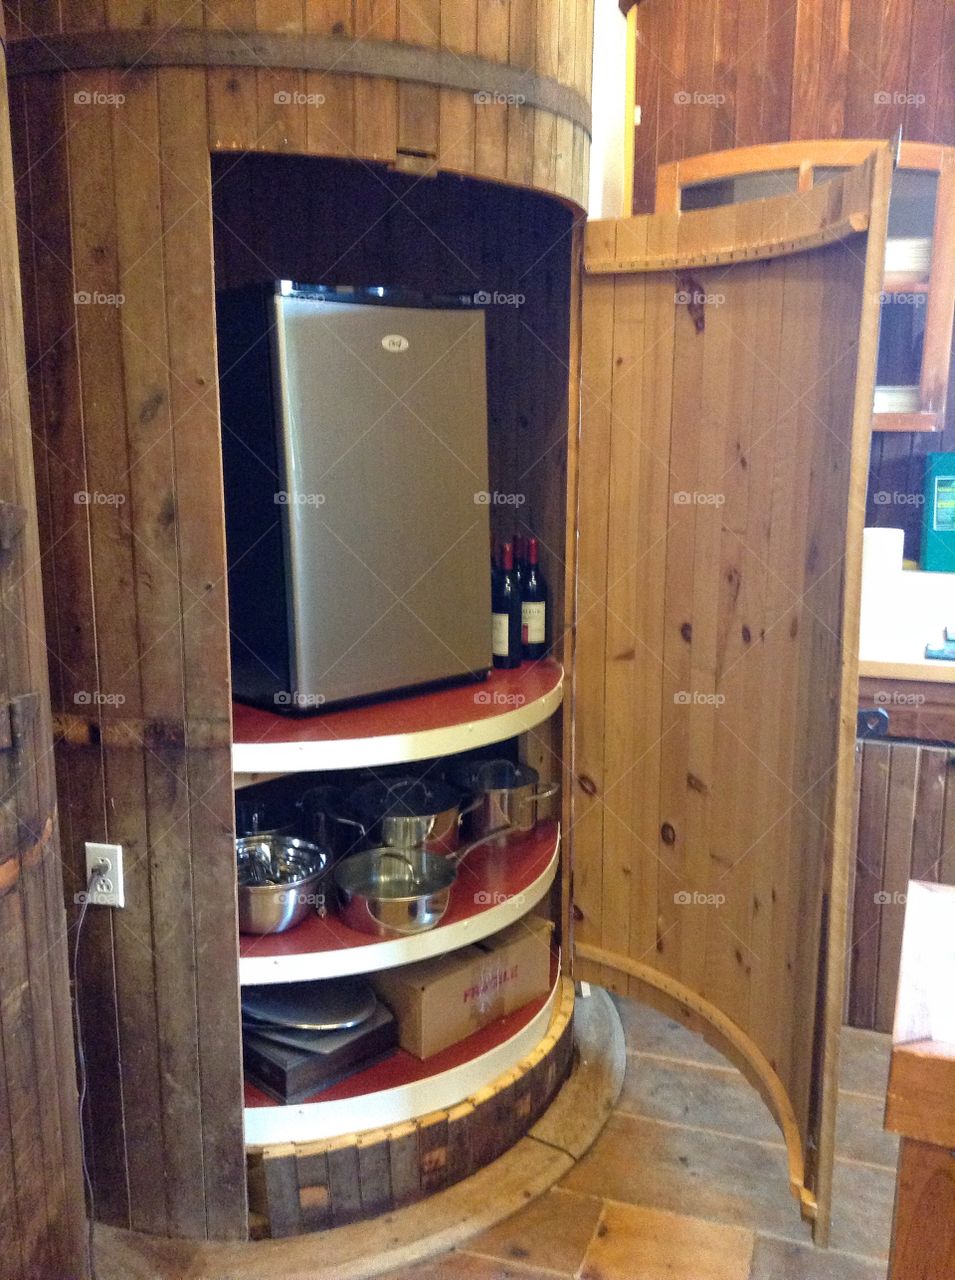 Fridge and extra storage space in an old feed mill that is now half store/art gallery and half private home. 